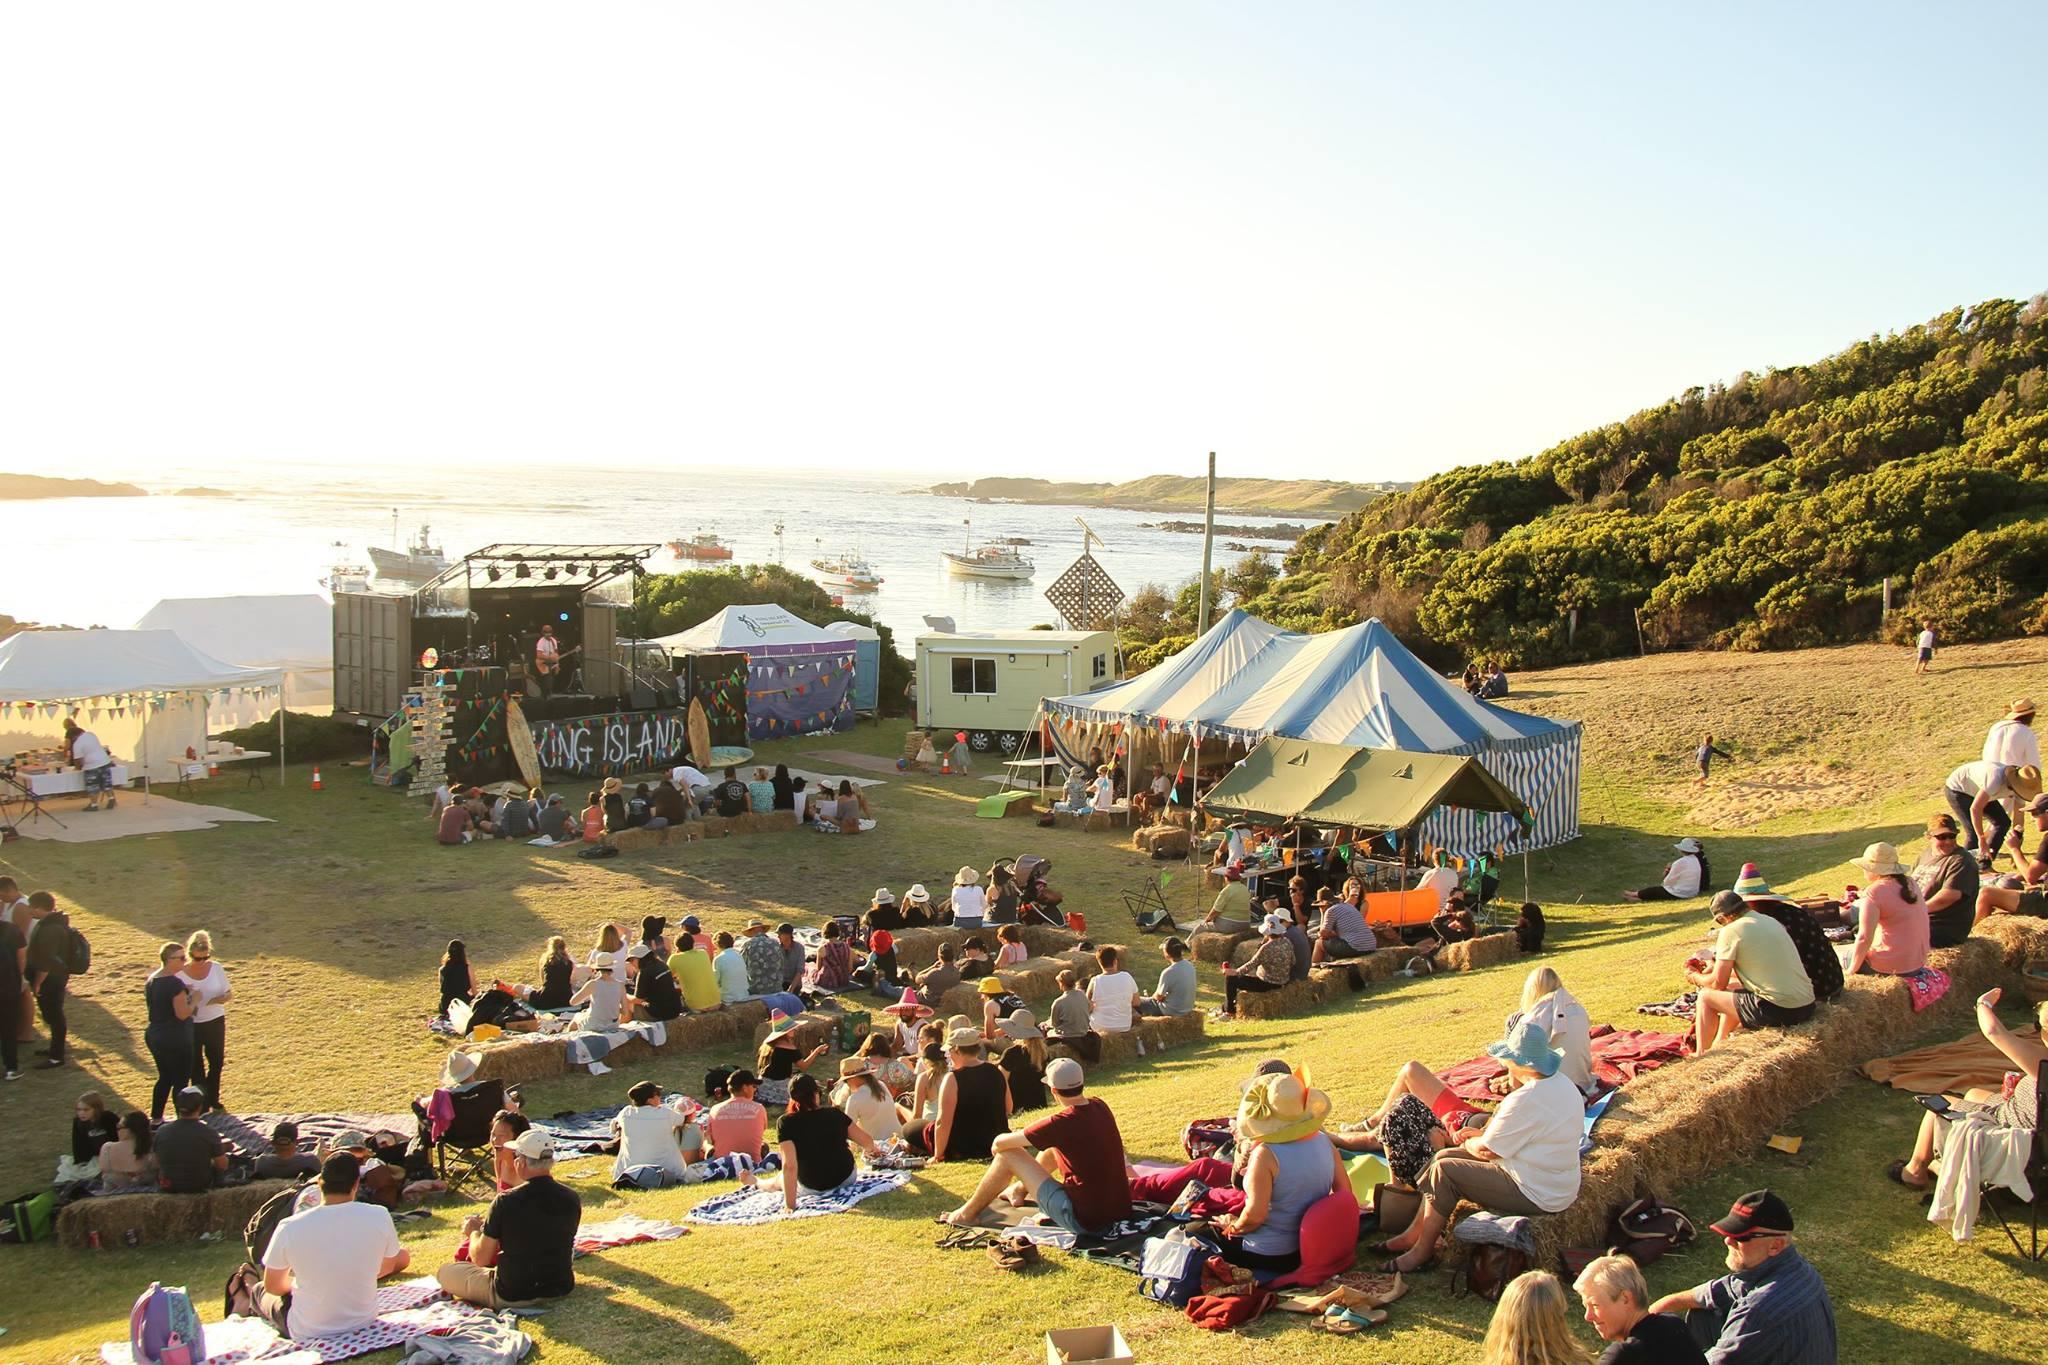 Festival of King Island, Currie Harbour